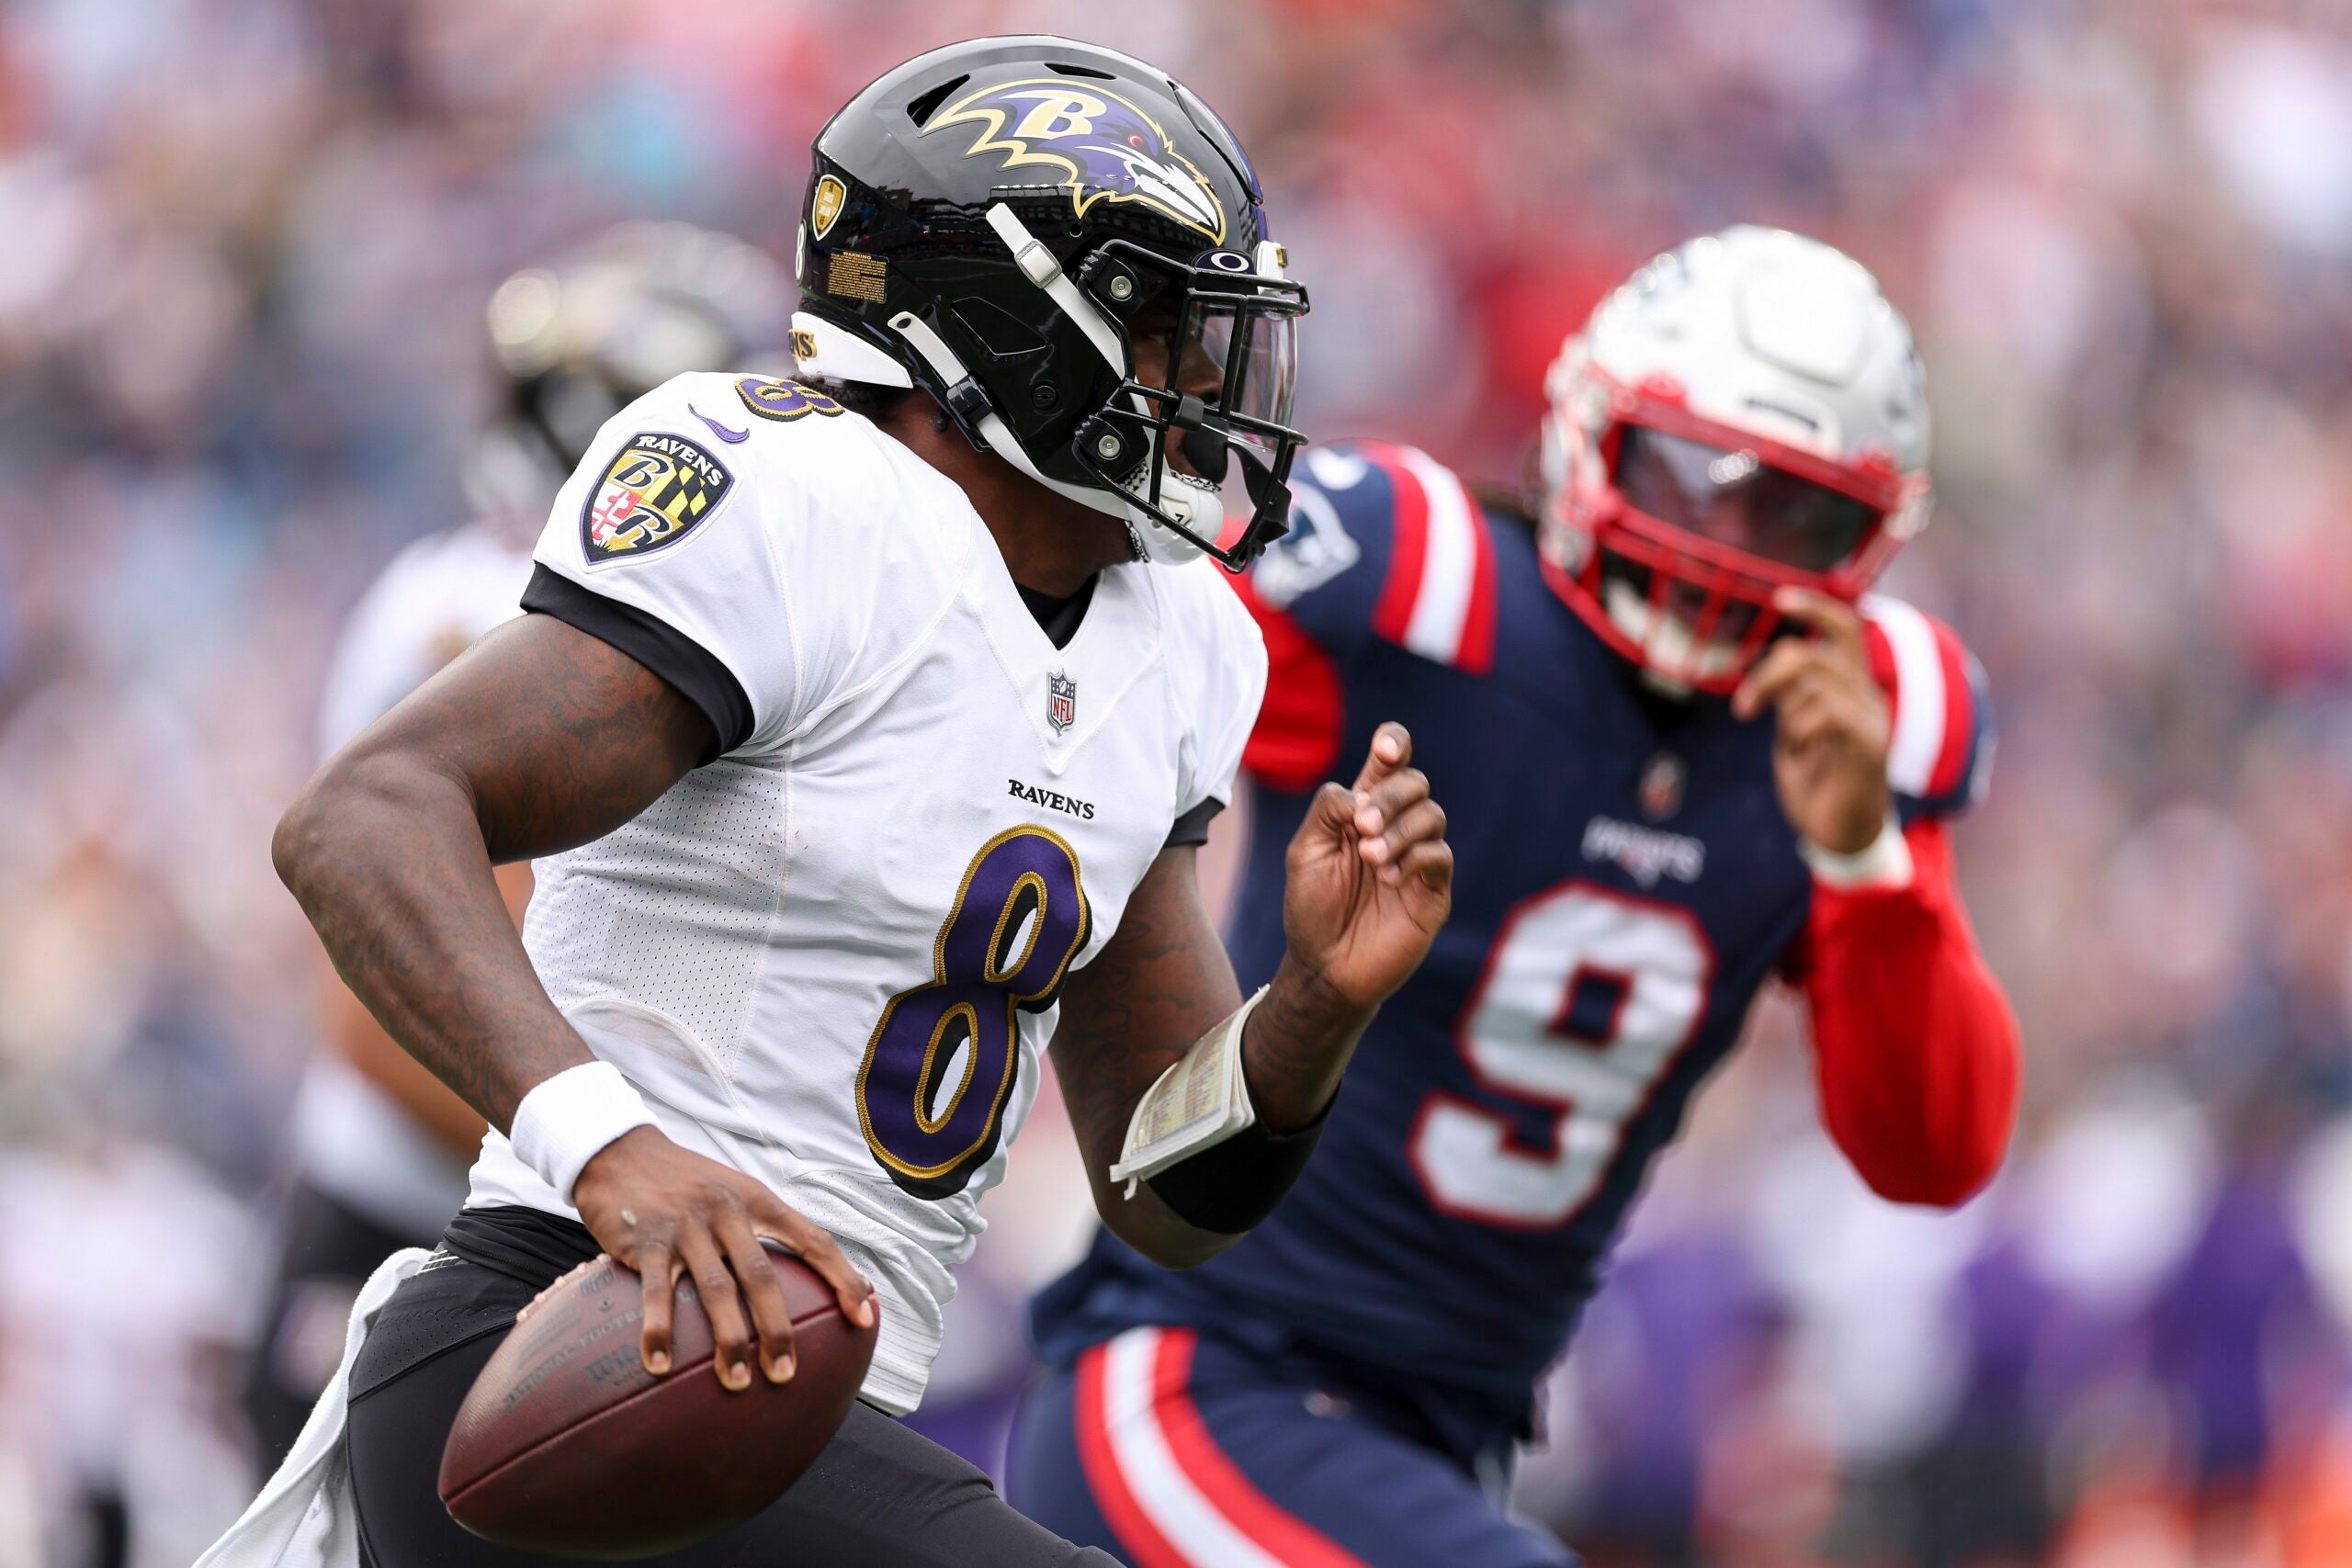 Quarterback Lamar Jackson #8 of the Baltimore Ravens attempts a pass during the first half at Gillette Stadium on September 25, 2022 in Foxborough, Massachusetts.